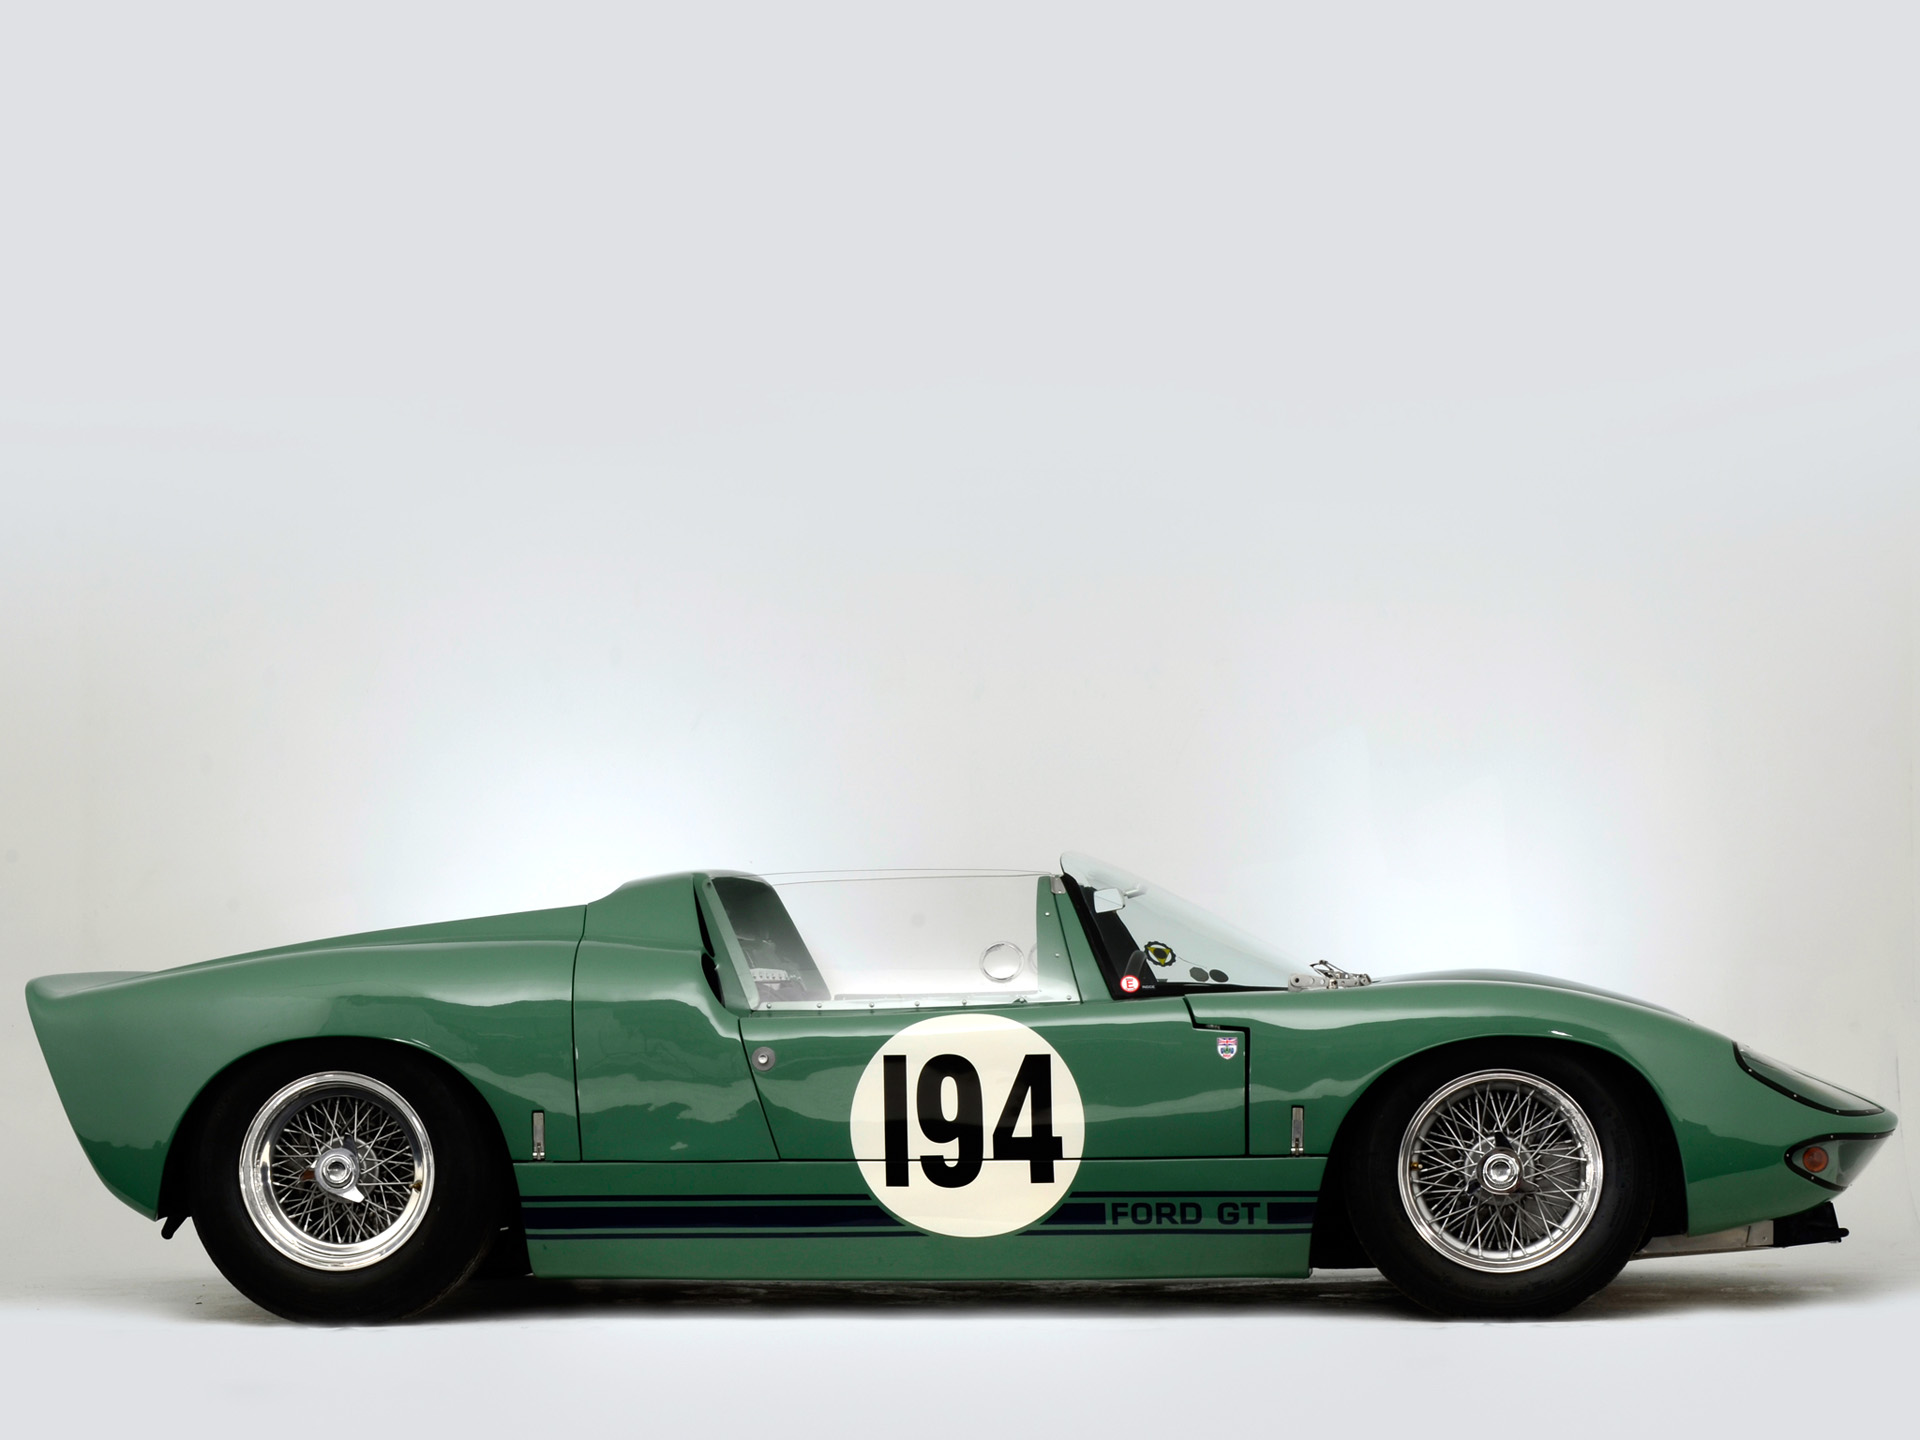 1965, Ford, Gt, Roadster, Prototype, Supercar, Race, Racing, Classic, G t Wallpaper